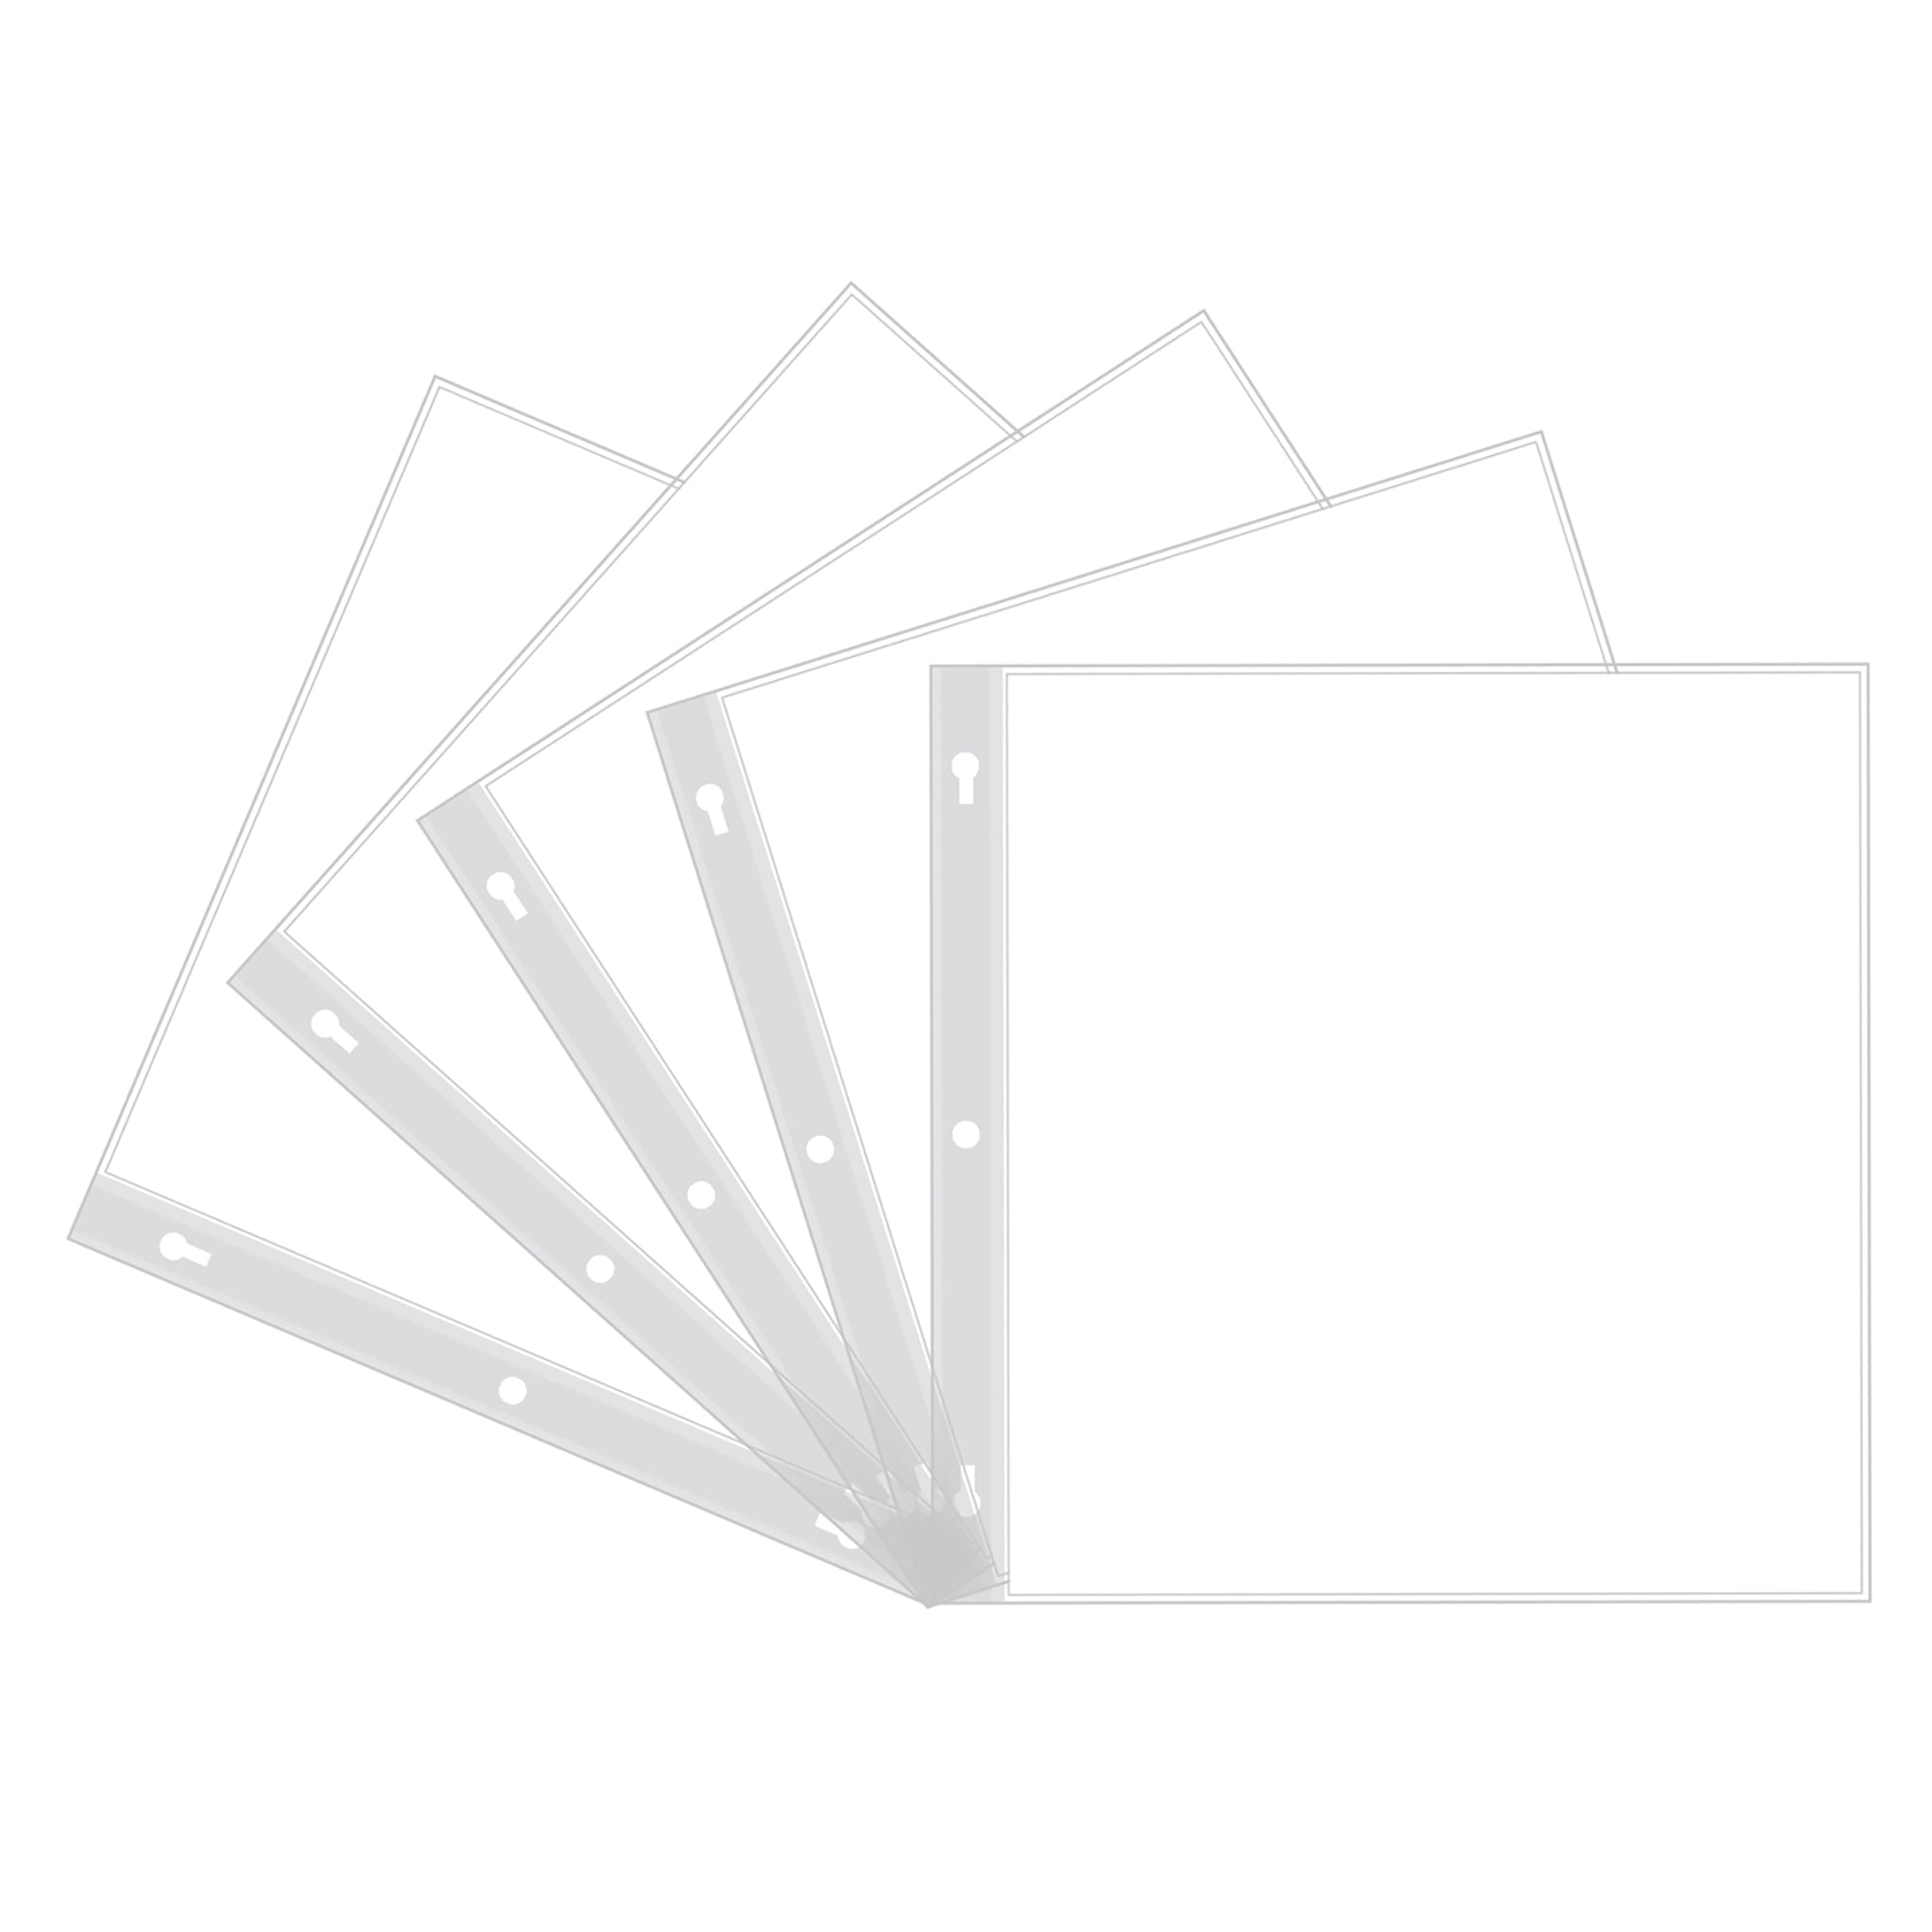 5 12x12 pages + extra posts White Scrapbook Top Loading Refill Pages 